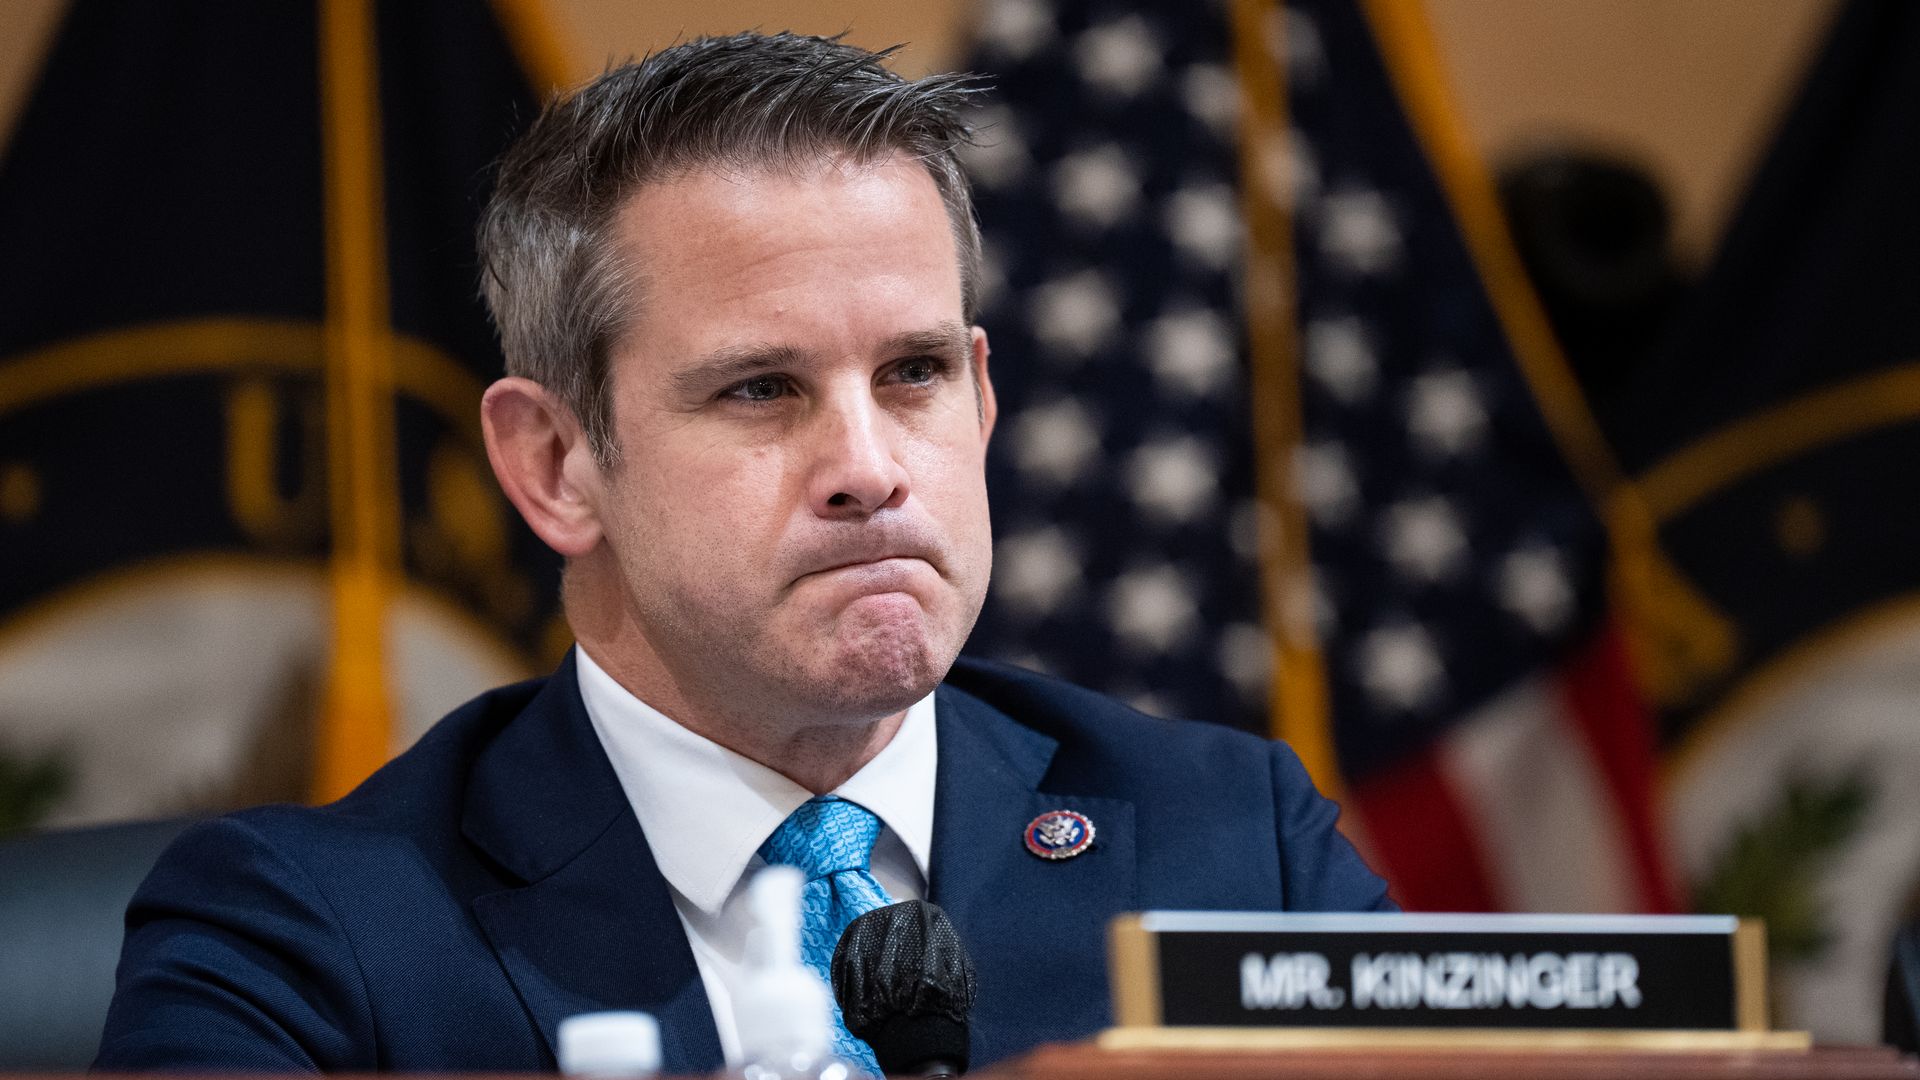 Rep. Adam Kinzinger, R-Ill., speaks during the Select Committee to Investigate the January 6th Attack on the US Capitol hearing in Washington on Thursday, July 21.